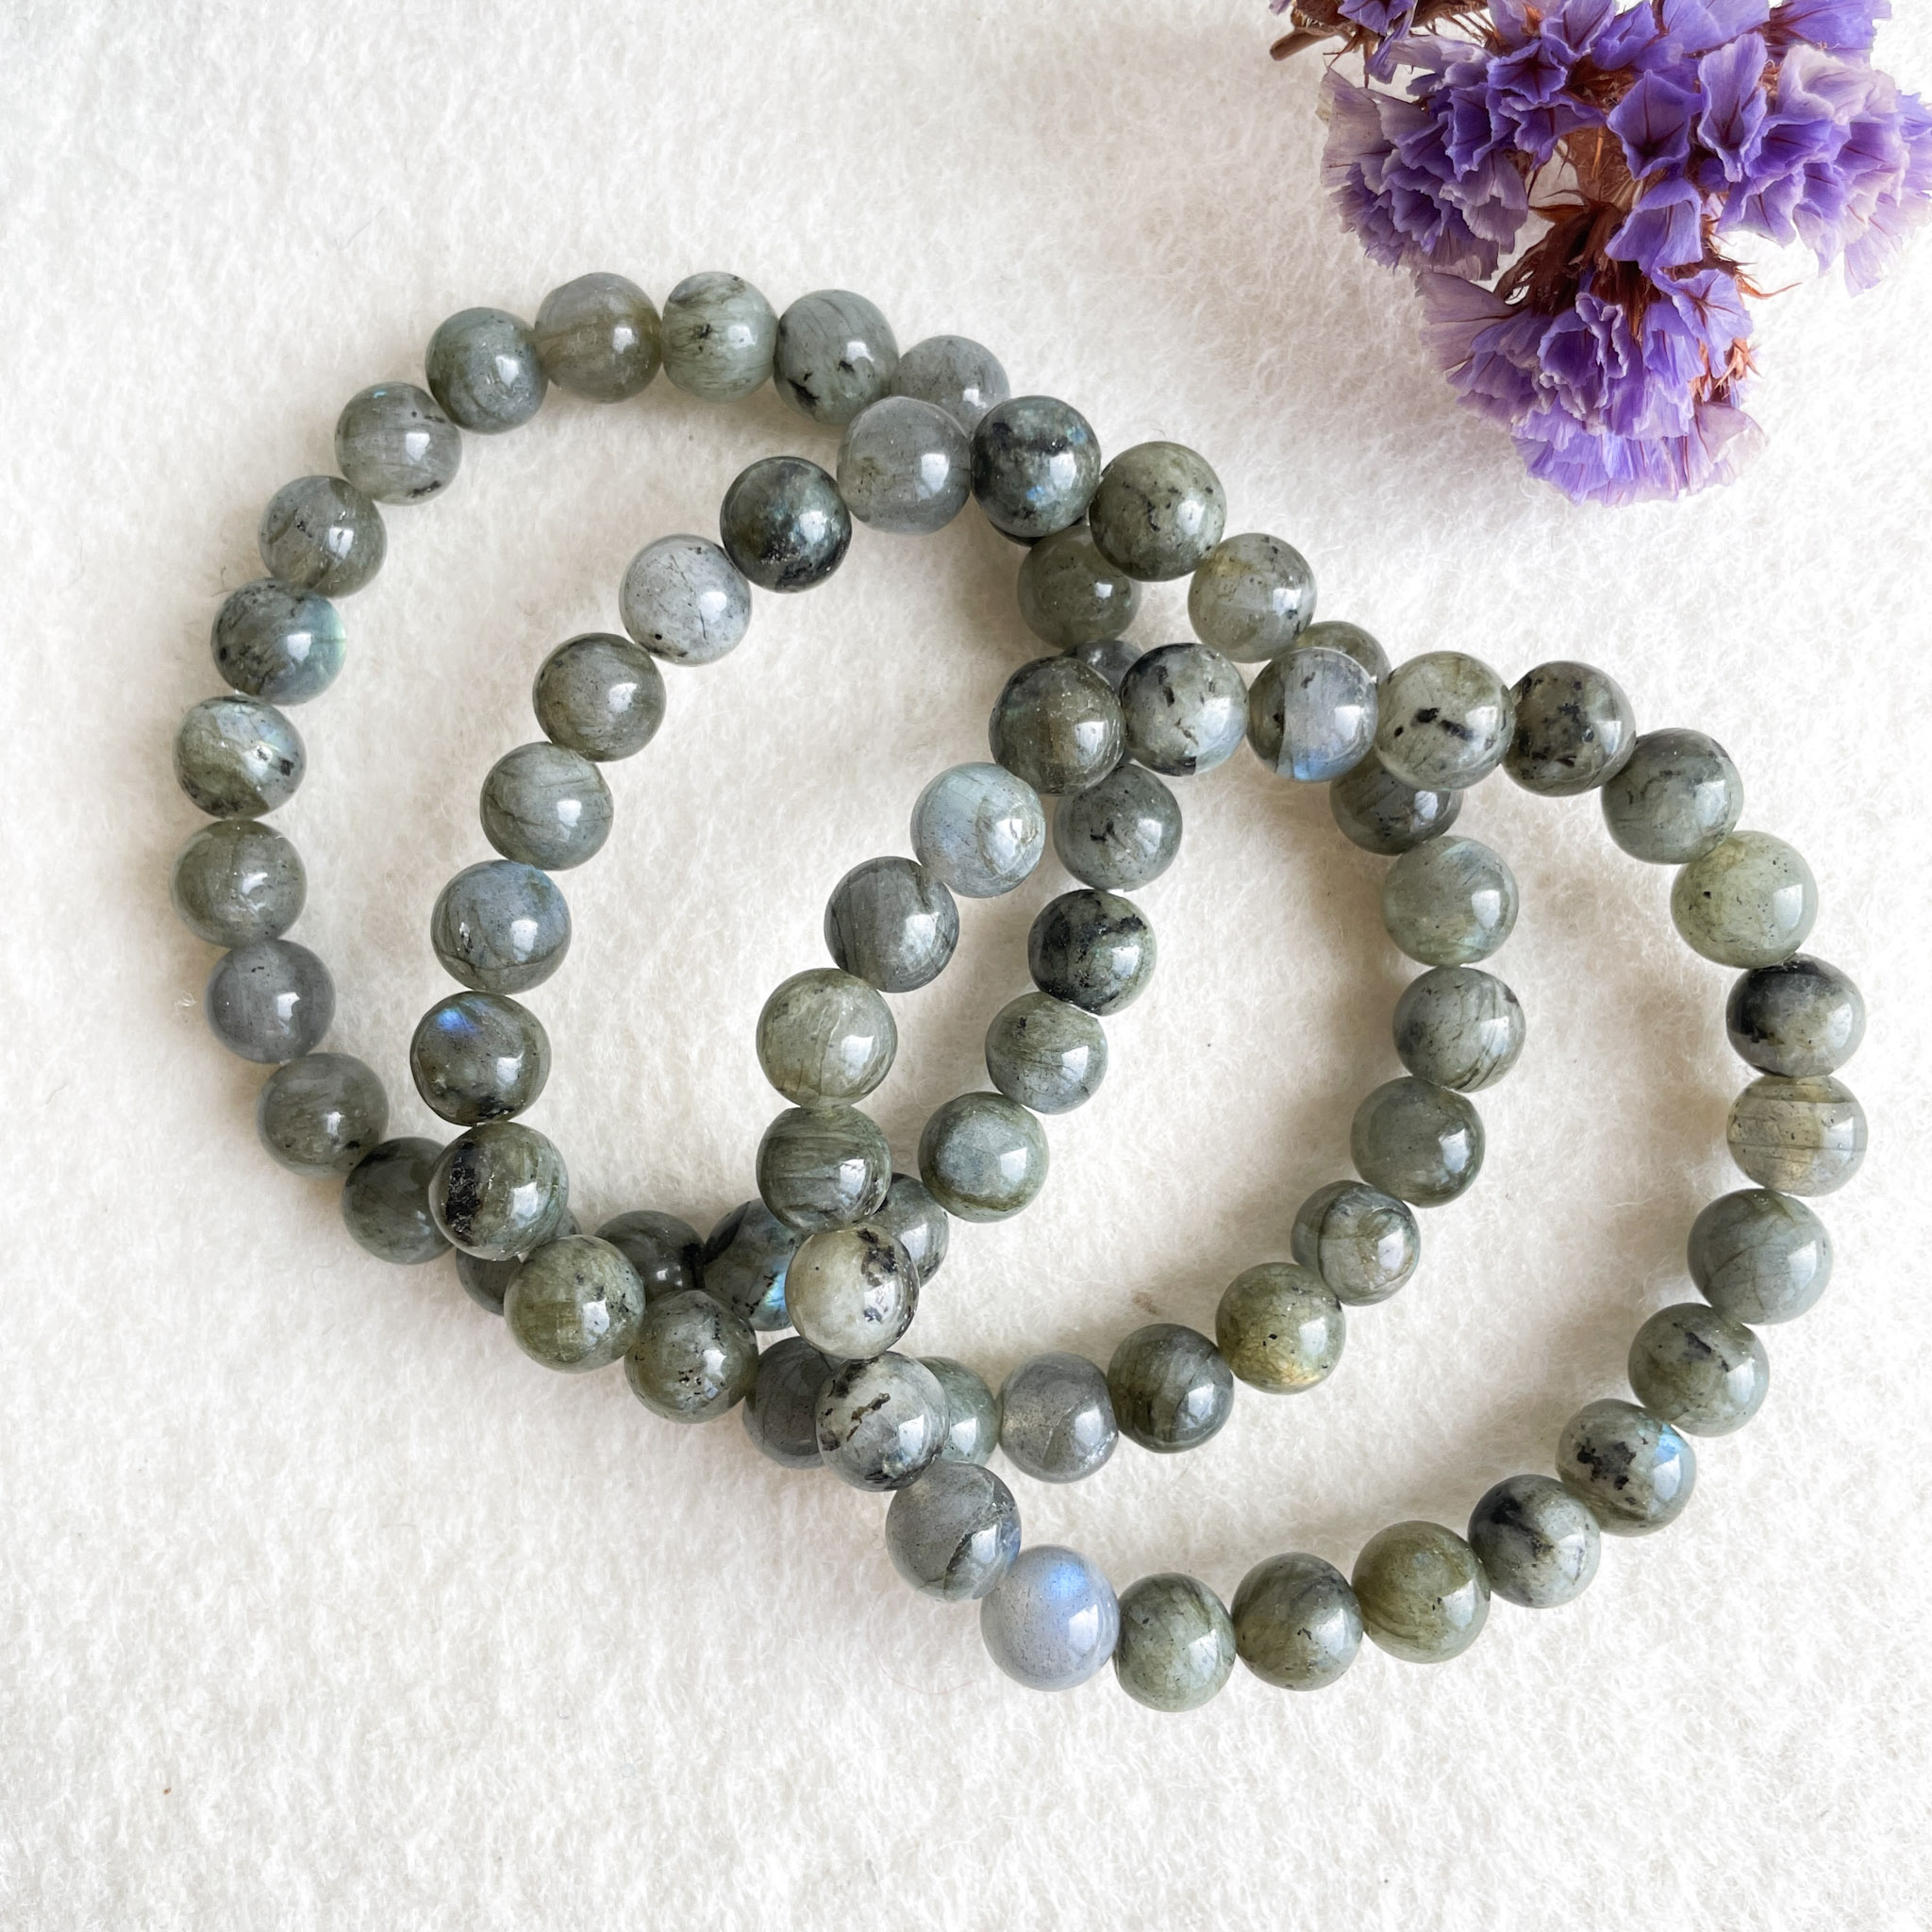 Two strands of labradorite beaded bracelets on a white textured background with a purple dried flower in the top right corner.